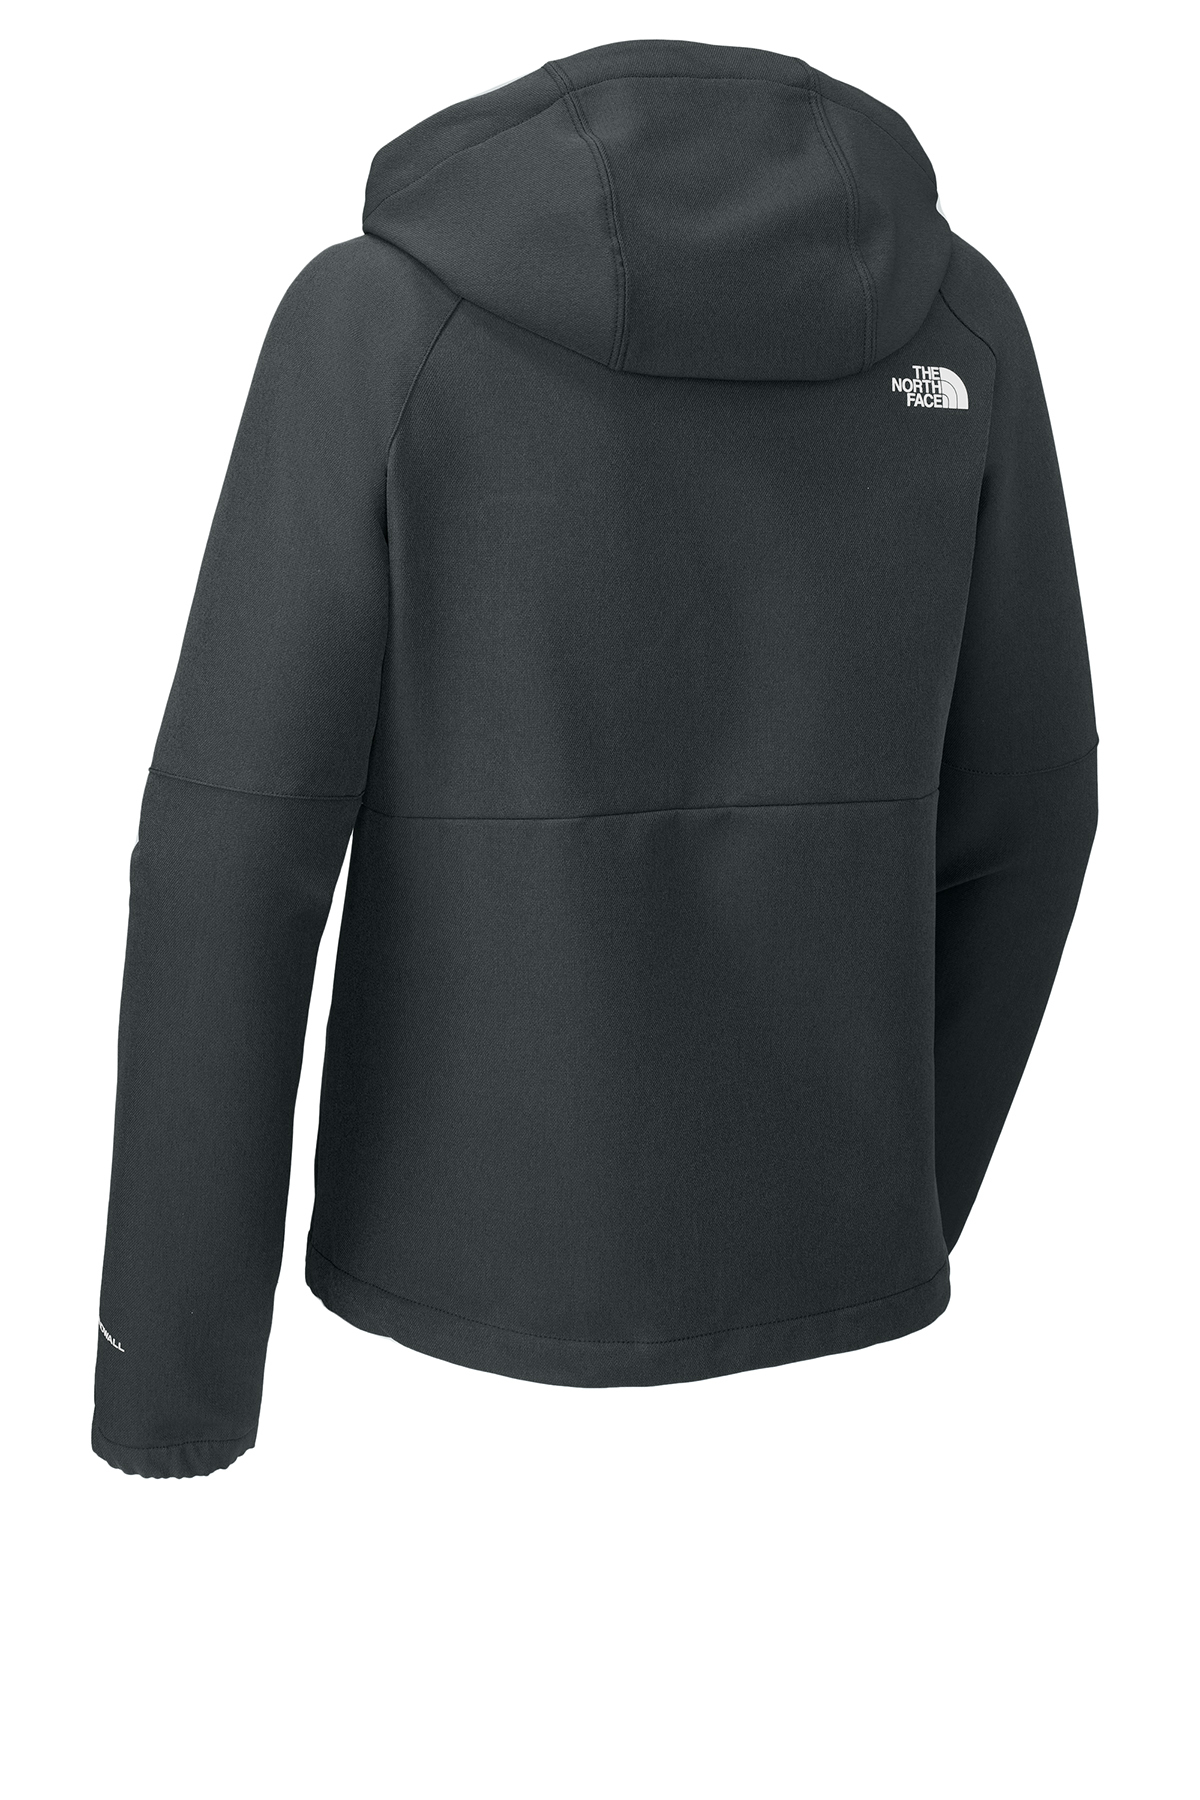 The North Face Ladies Barr Lake Hooded Soft Shell Jacket ...